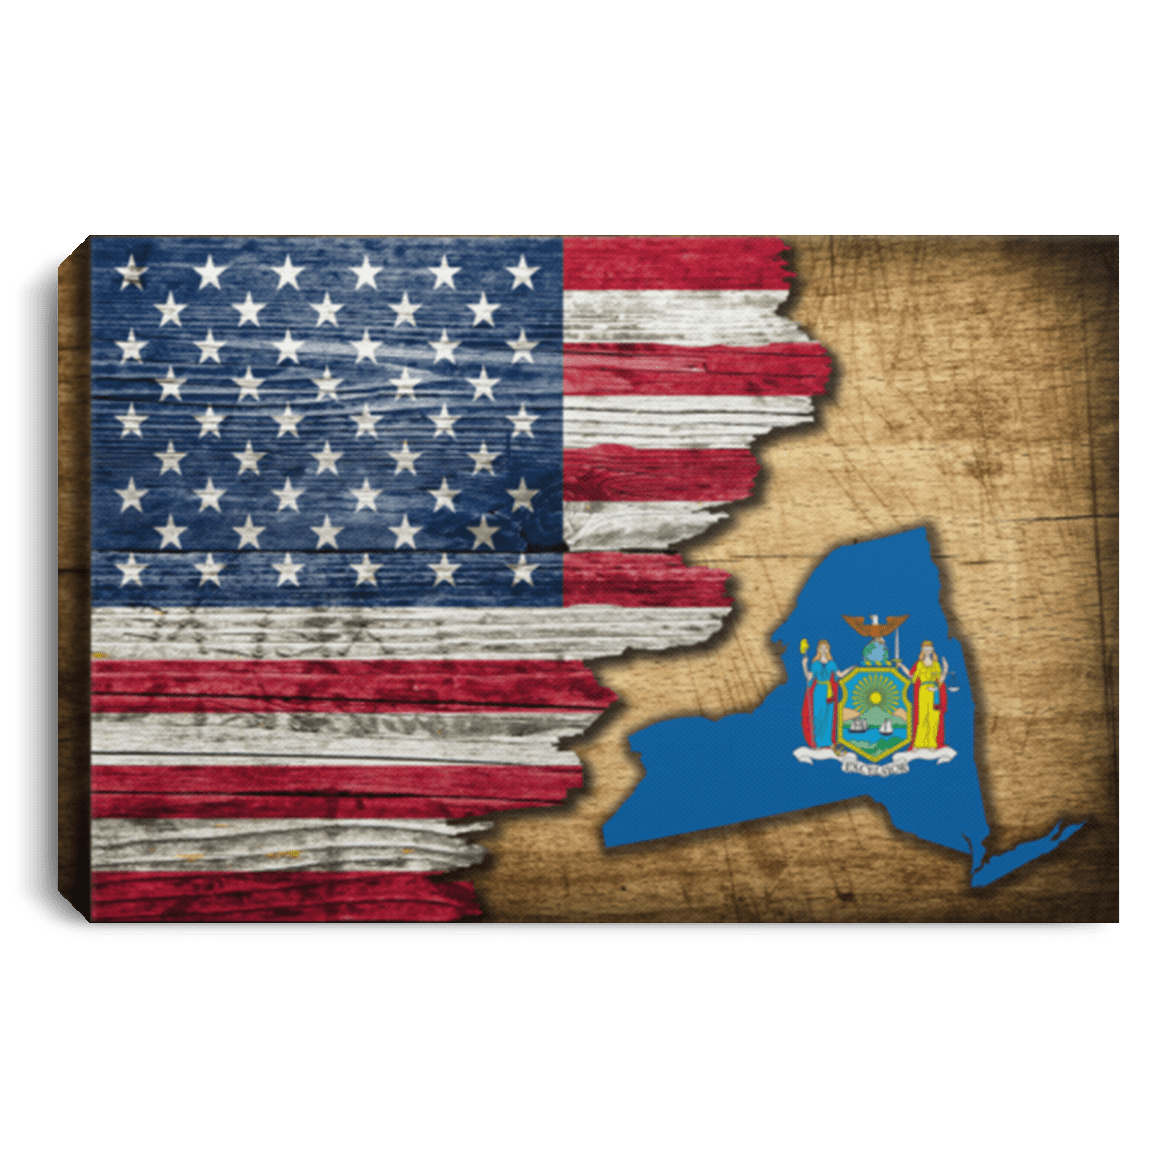 United States/New York Flag Ripped Effect 12X8 Inches Landscape Canvas .75In Frame